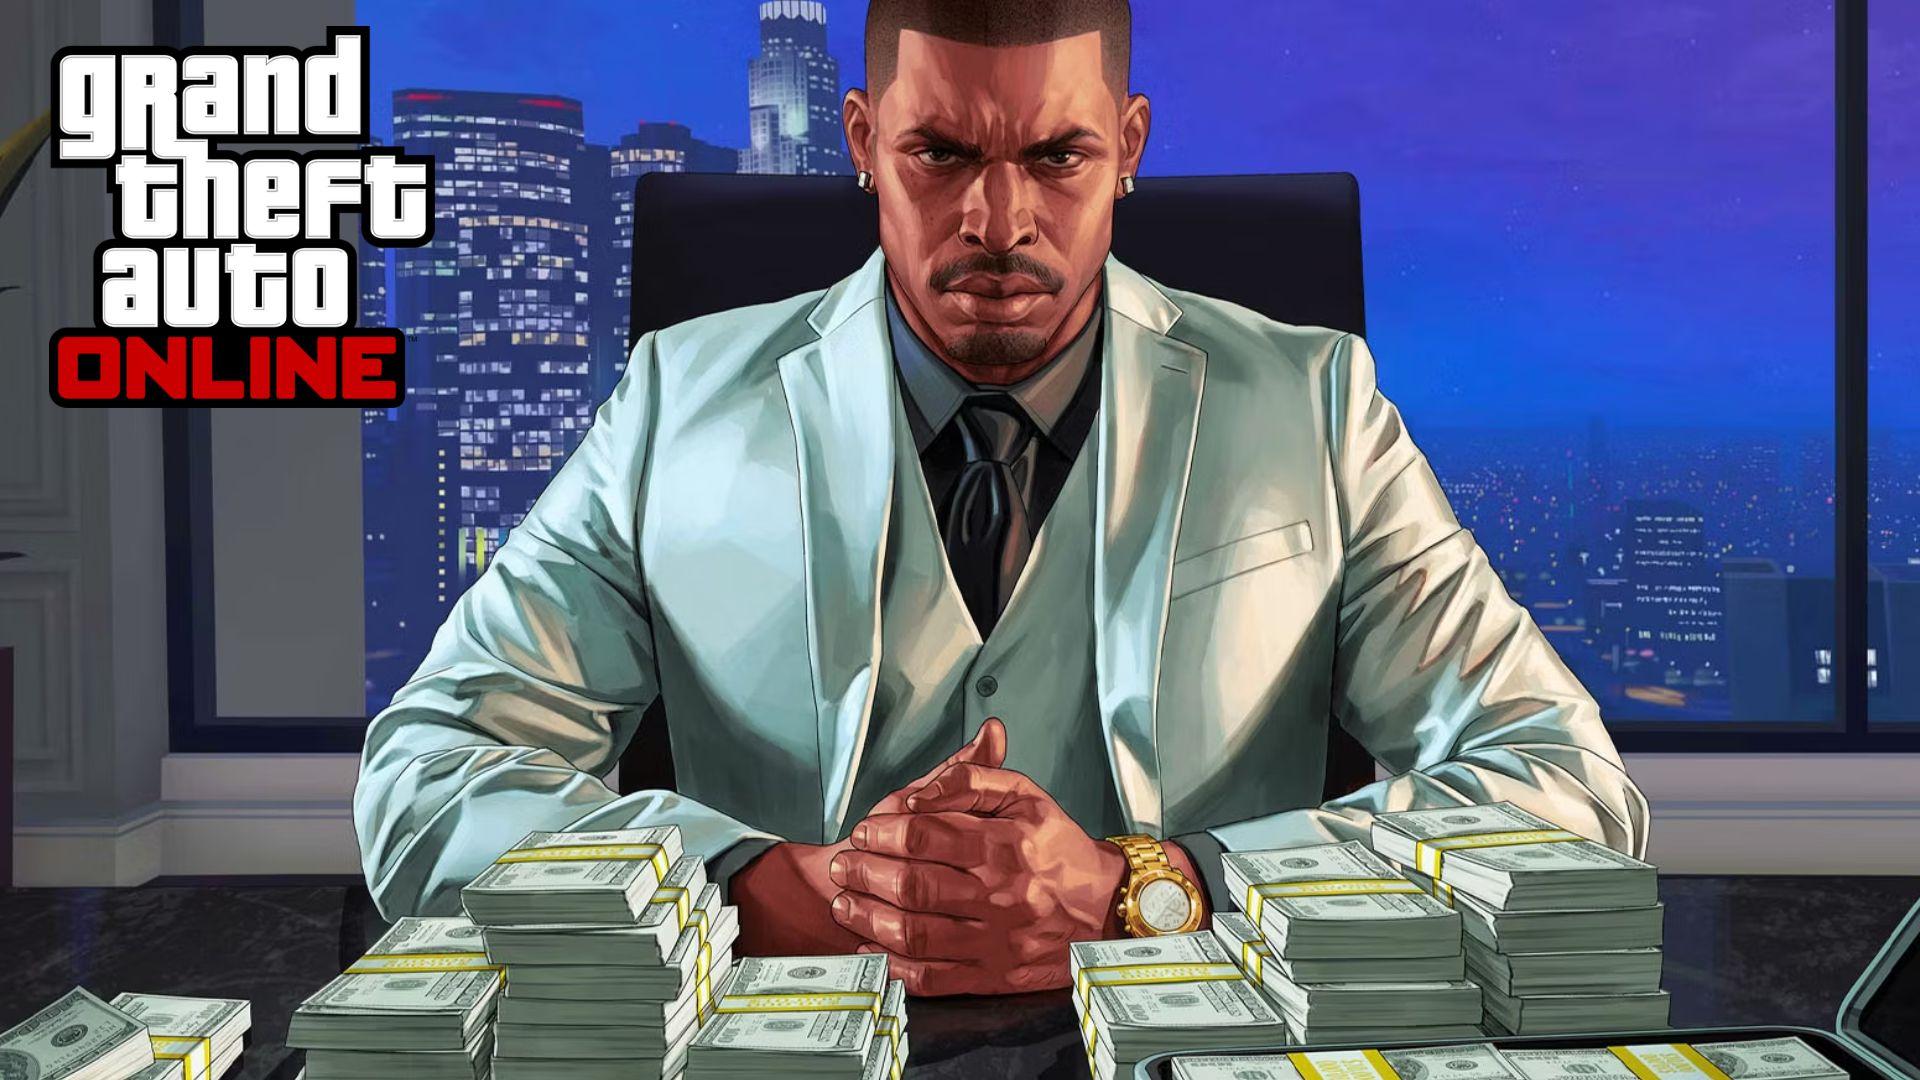 GTA Online character sat behind money on desk in white suit